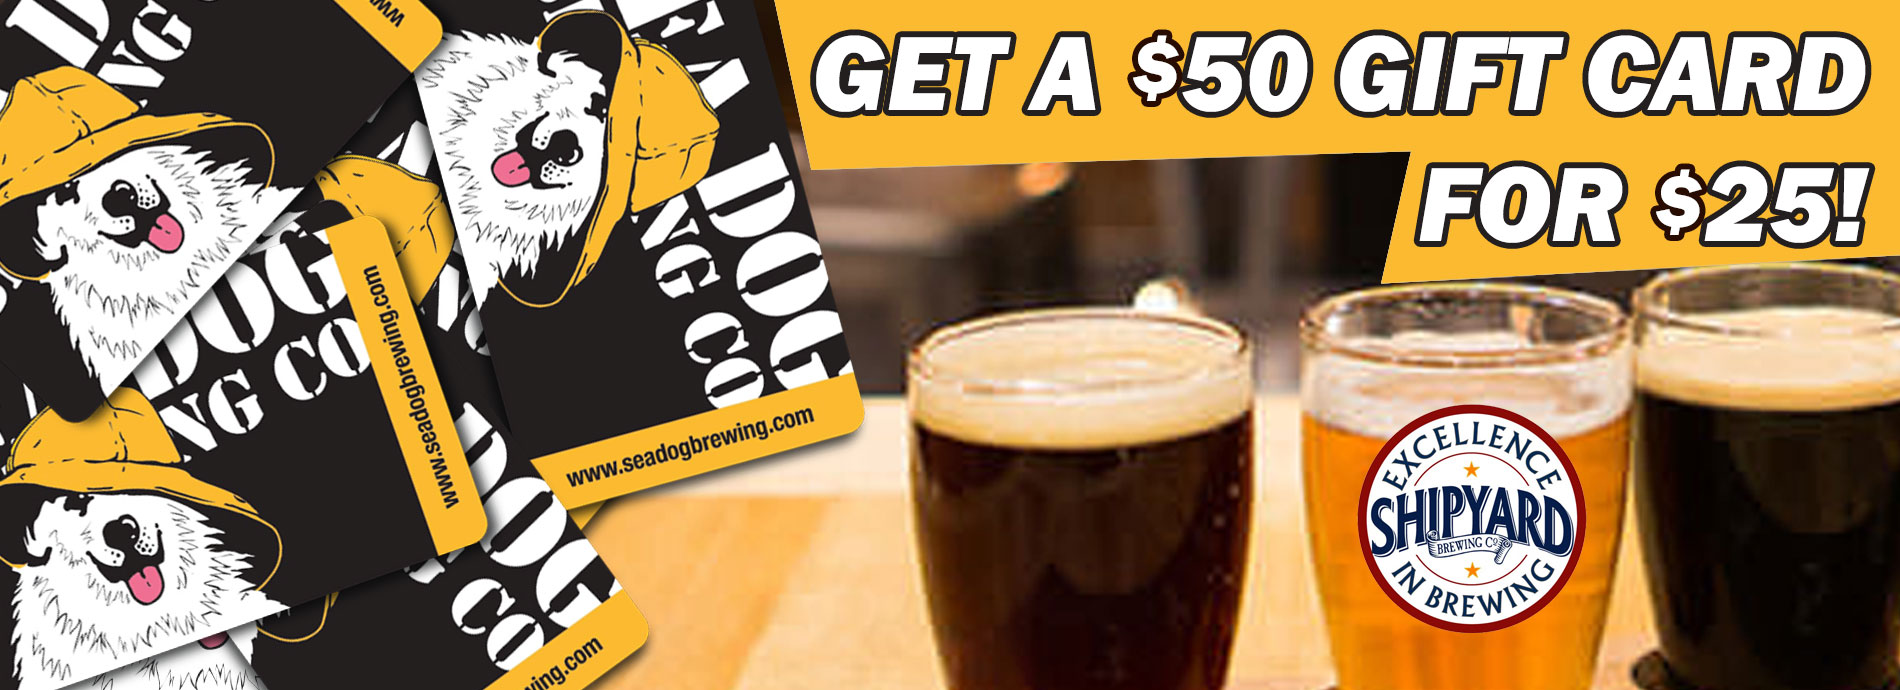 Sea Dog Brewing Gift Cards